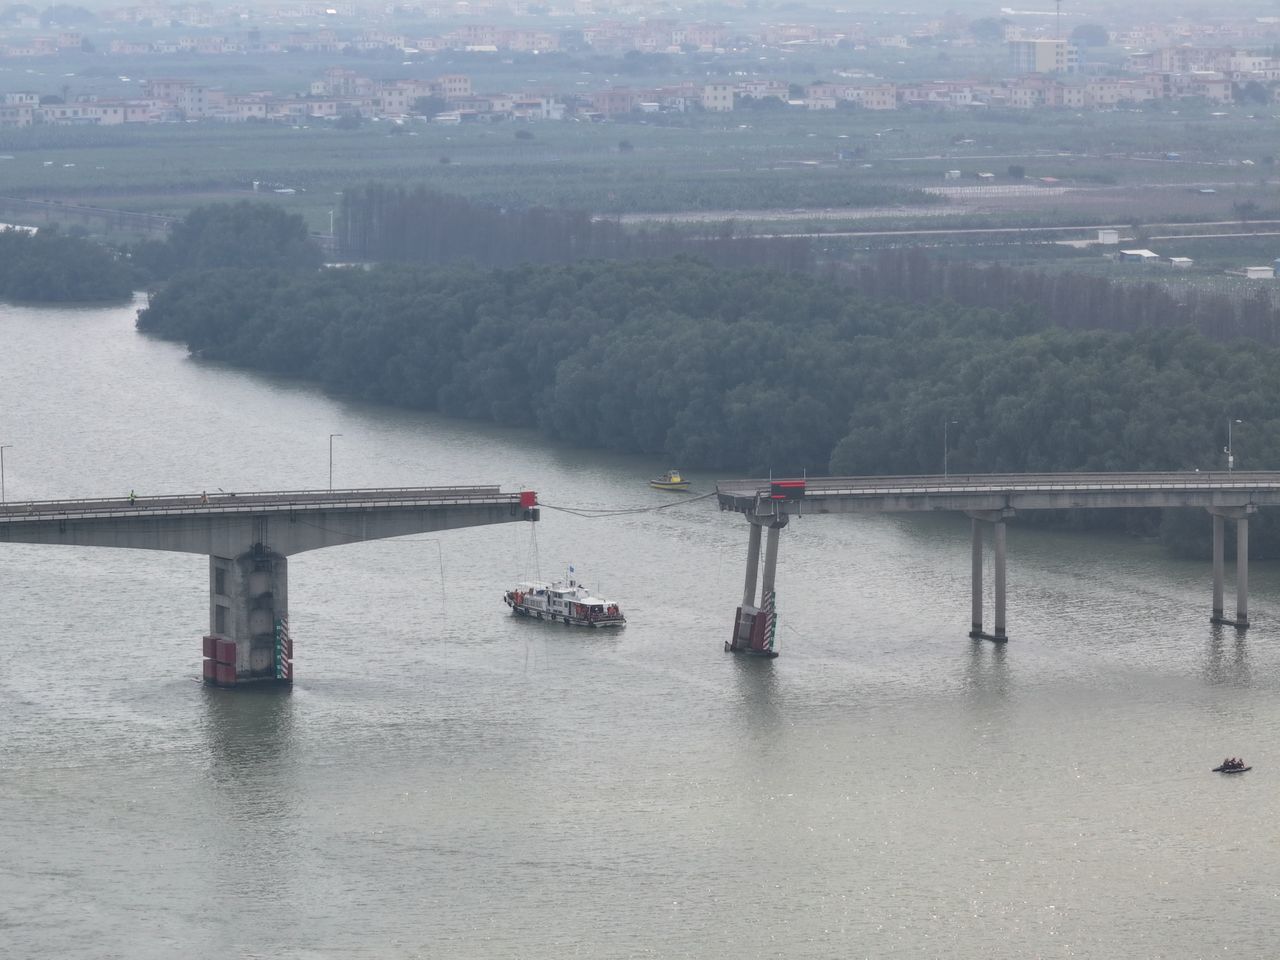 Disaster in Guangzhou. A ship rammed into the bridge.